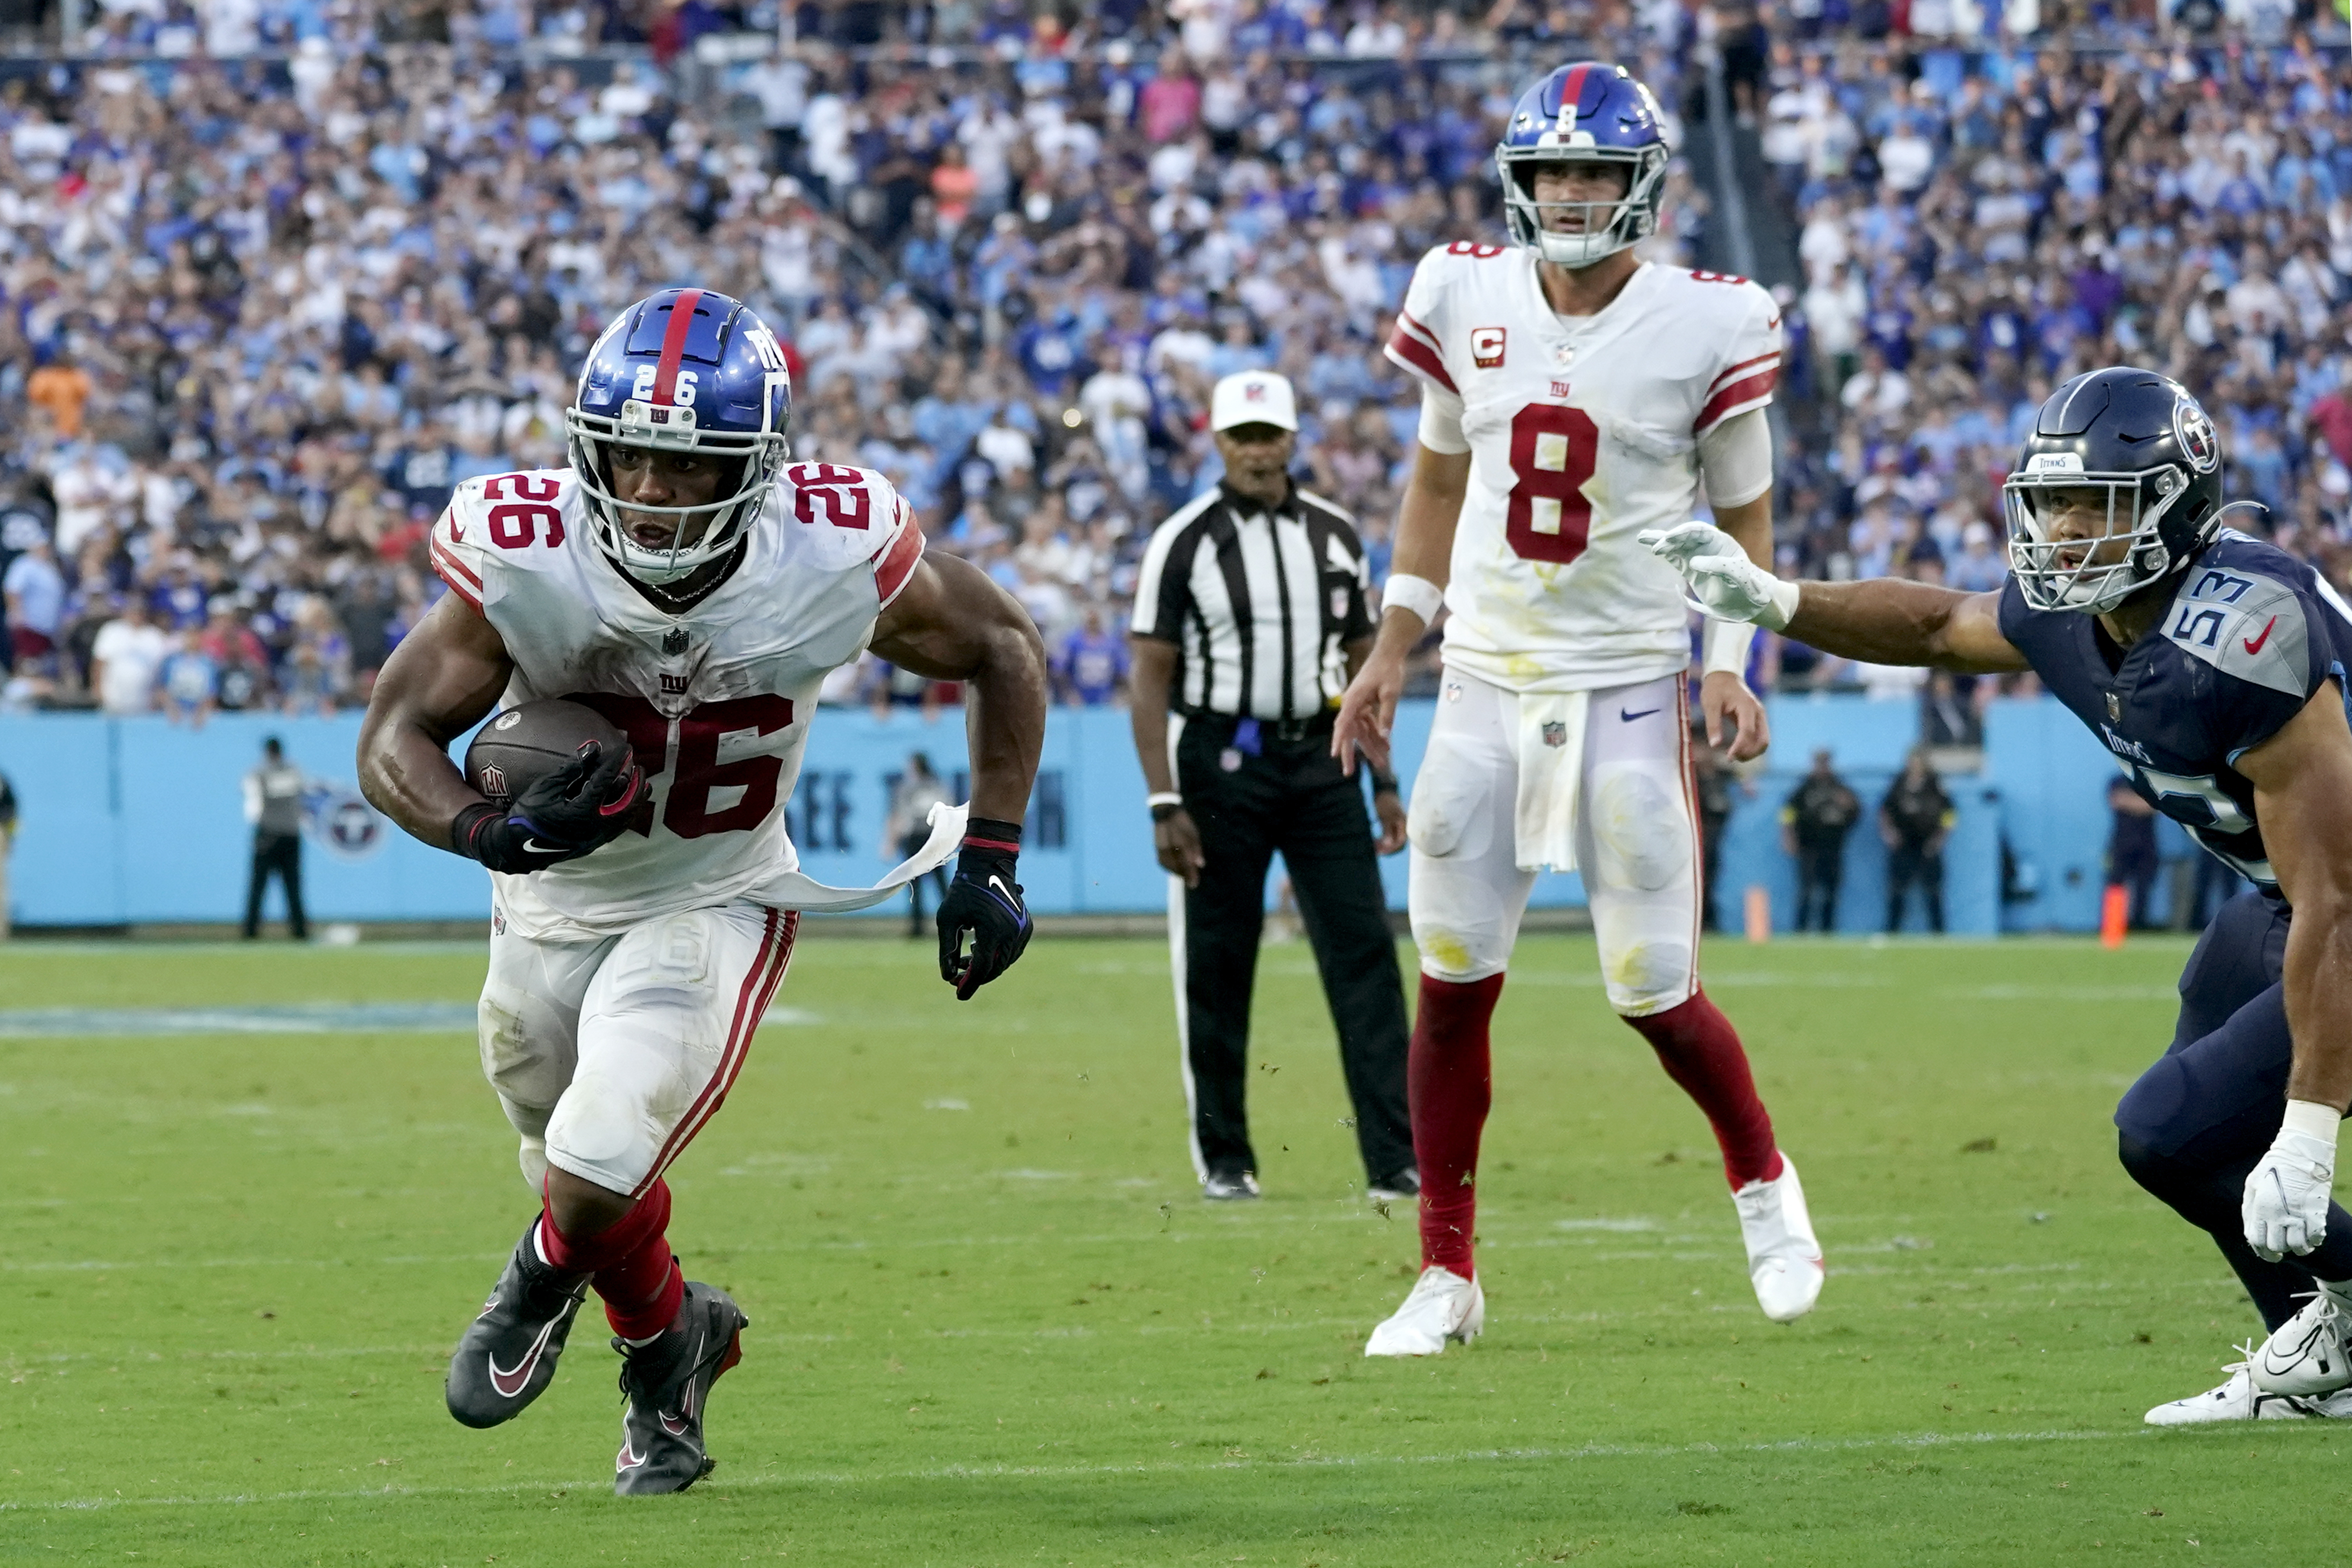 Panthers vs. Giants predictions and player props for NFL Week 2